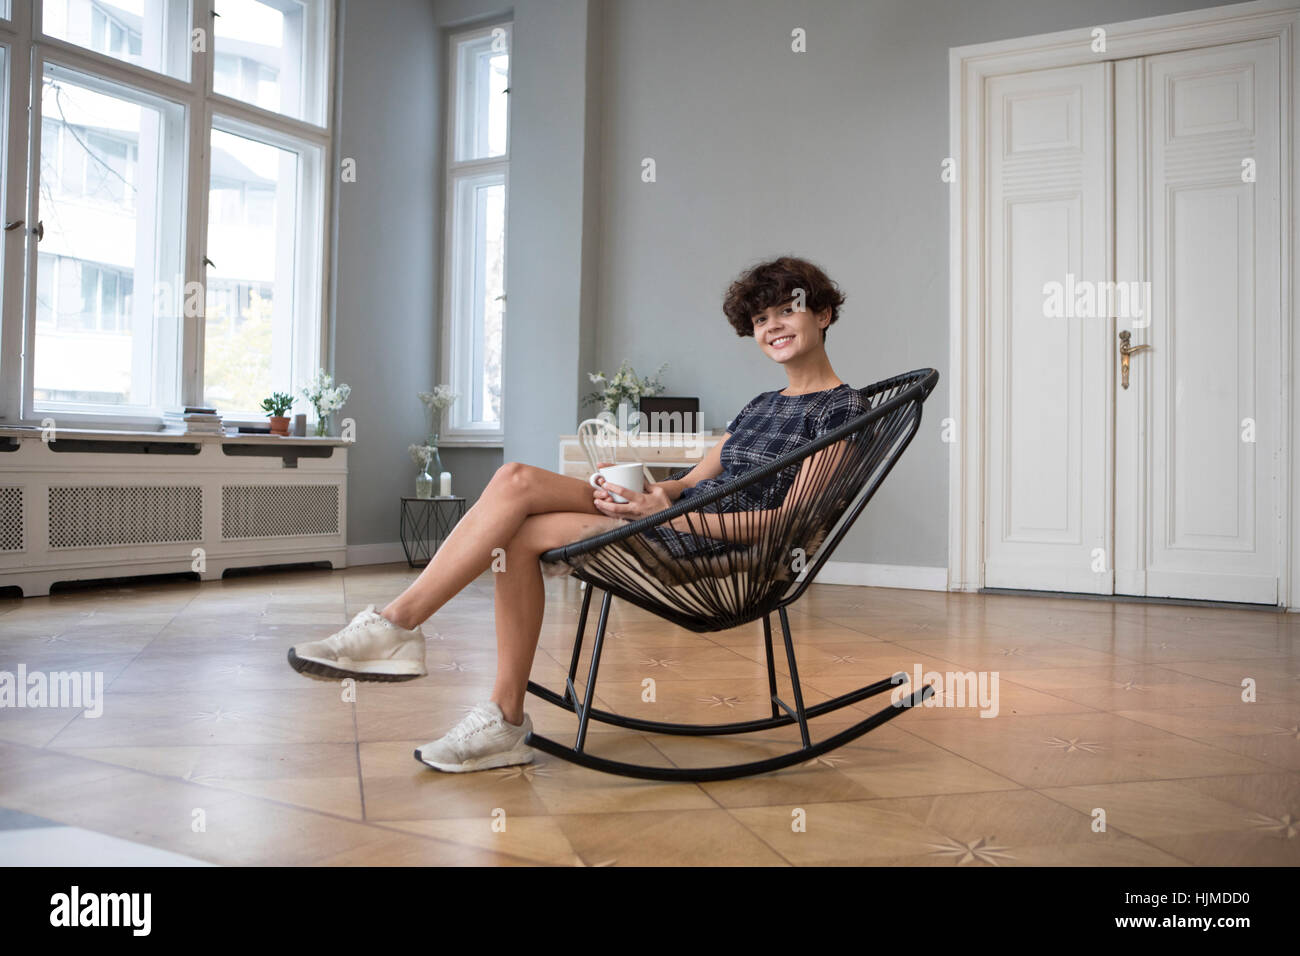 Portrait of smiling young woman sitting on rocking chair at home Banque D'Images